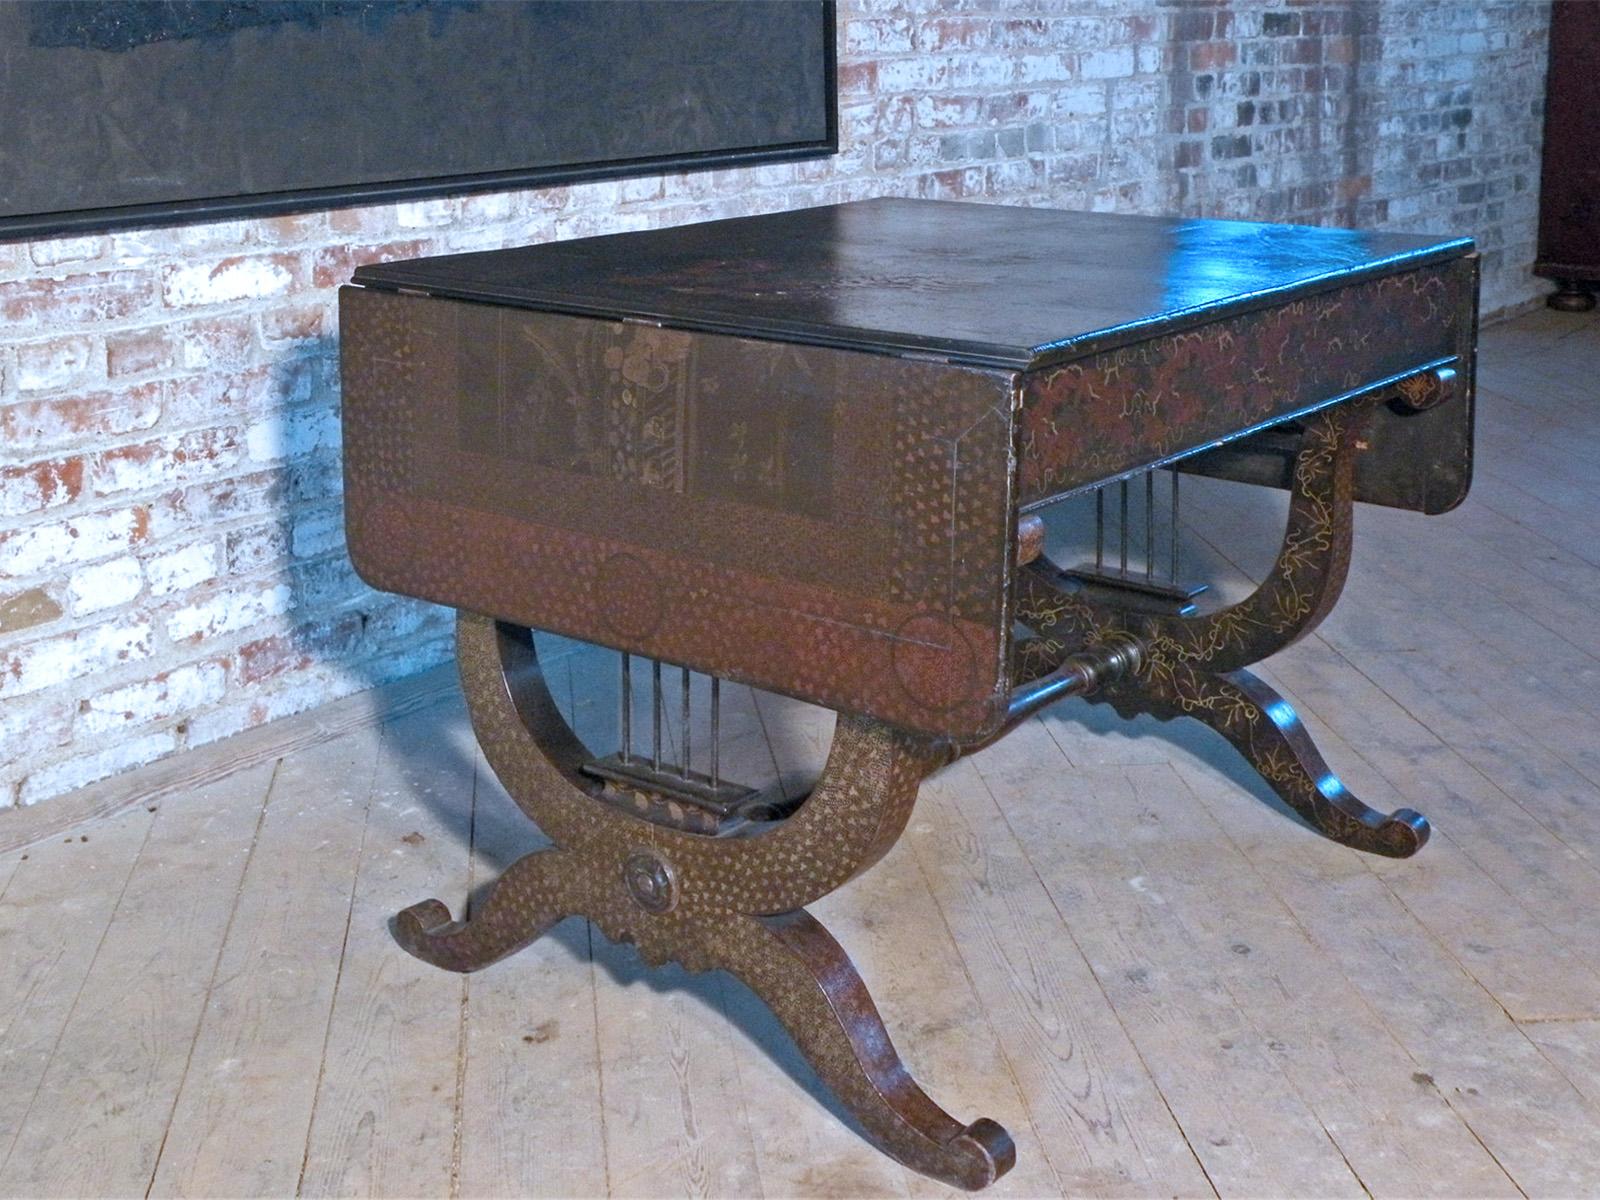 Unusual, English Late Regency Sofa Table with interesting Chinoiserie Decoration on a Black Lacquer background. The oblong top with drop-leaves at each end that are supported by swing-out brackets. The base consists of Lyre-shaped ends, connected by